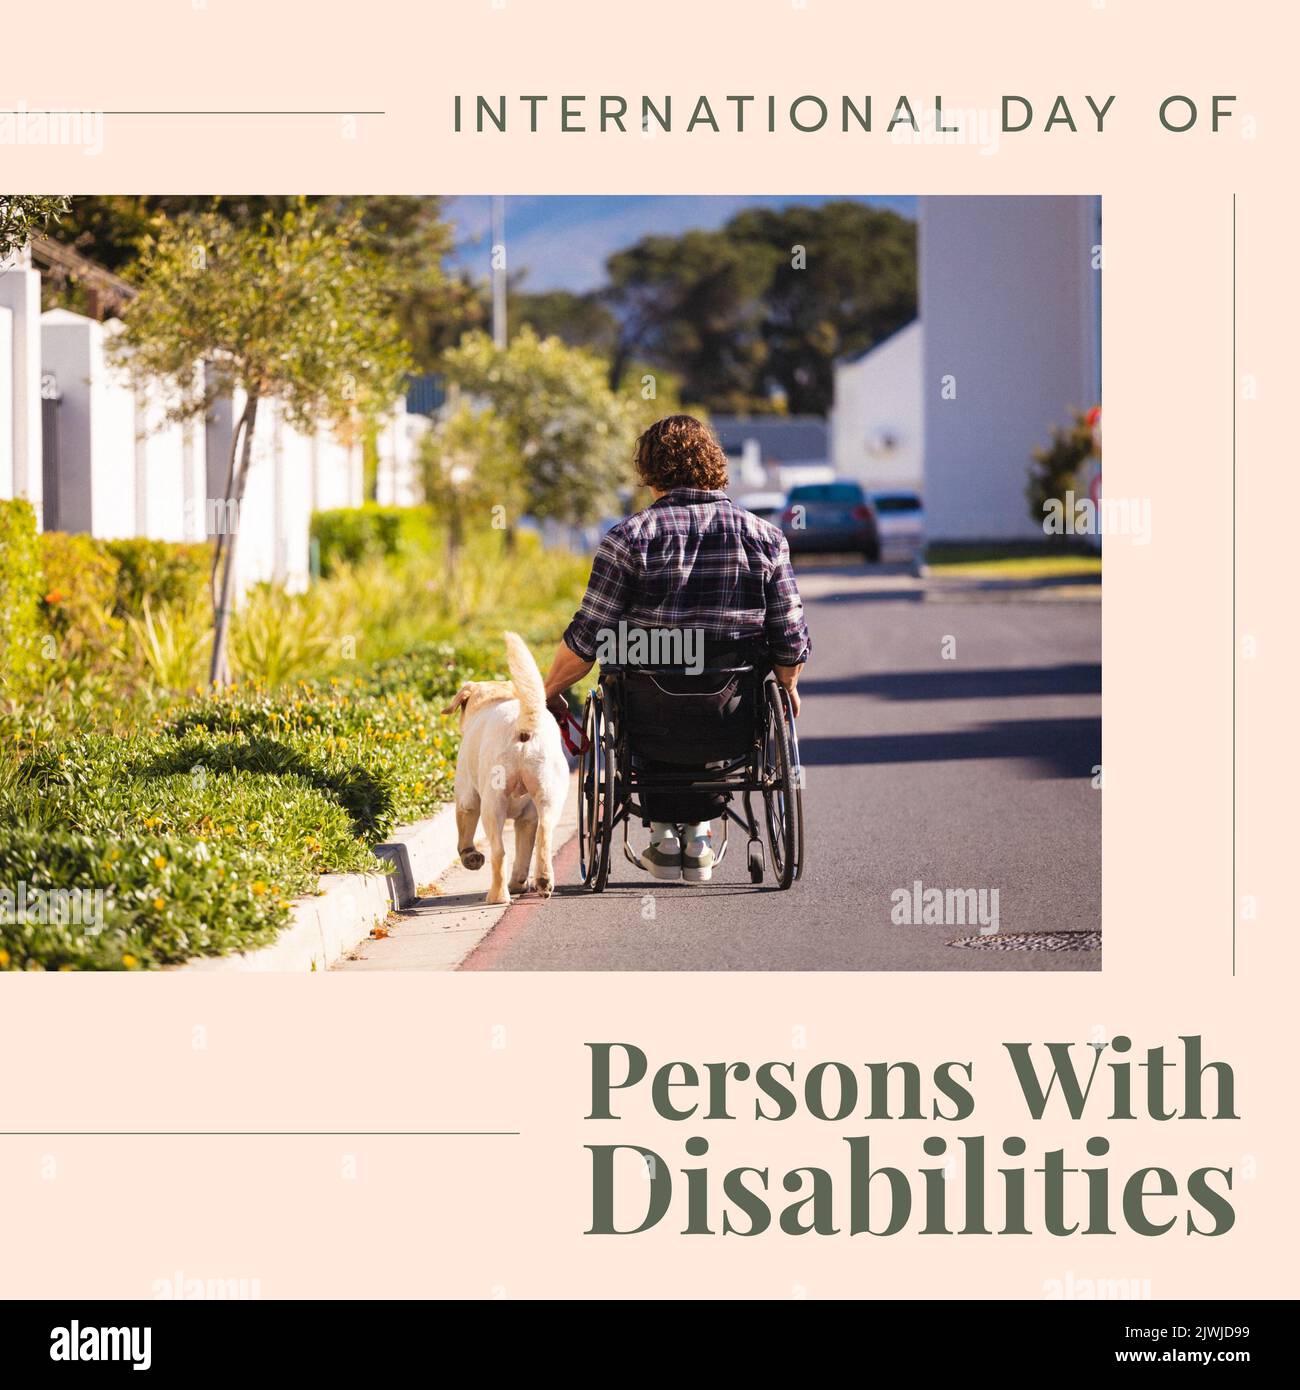 International day of persons with disabilities text and man playing with dog sitting on wheelchair Stock Photo